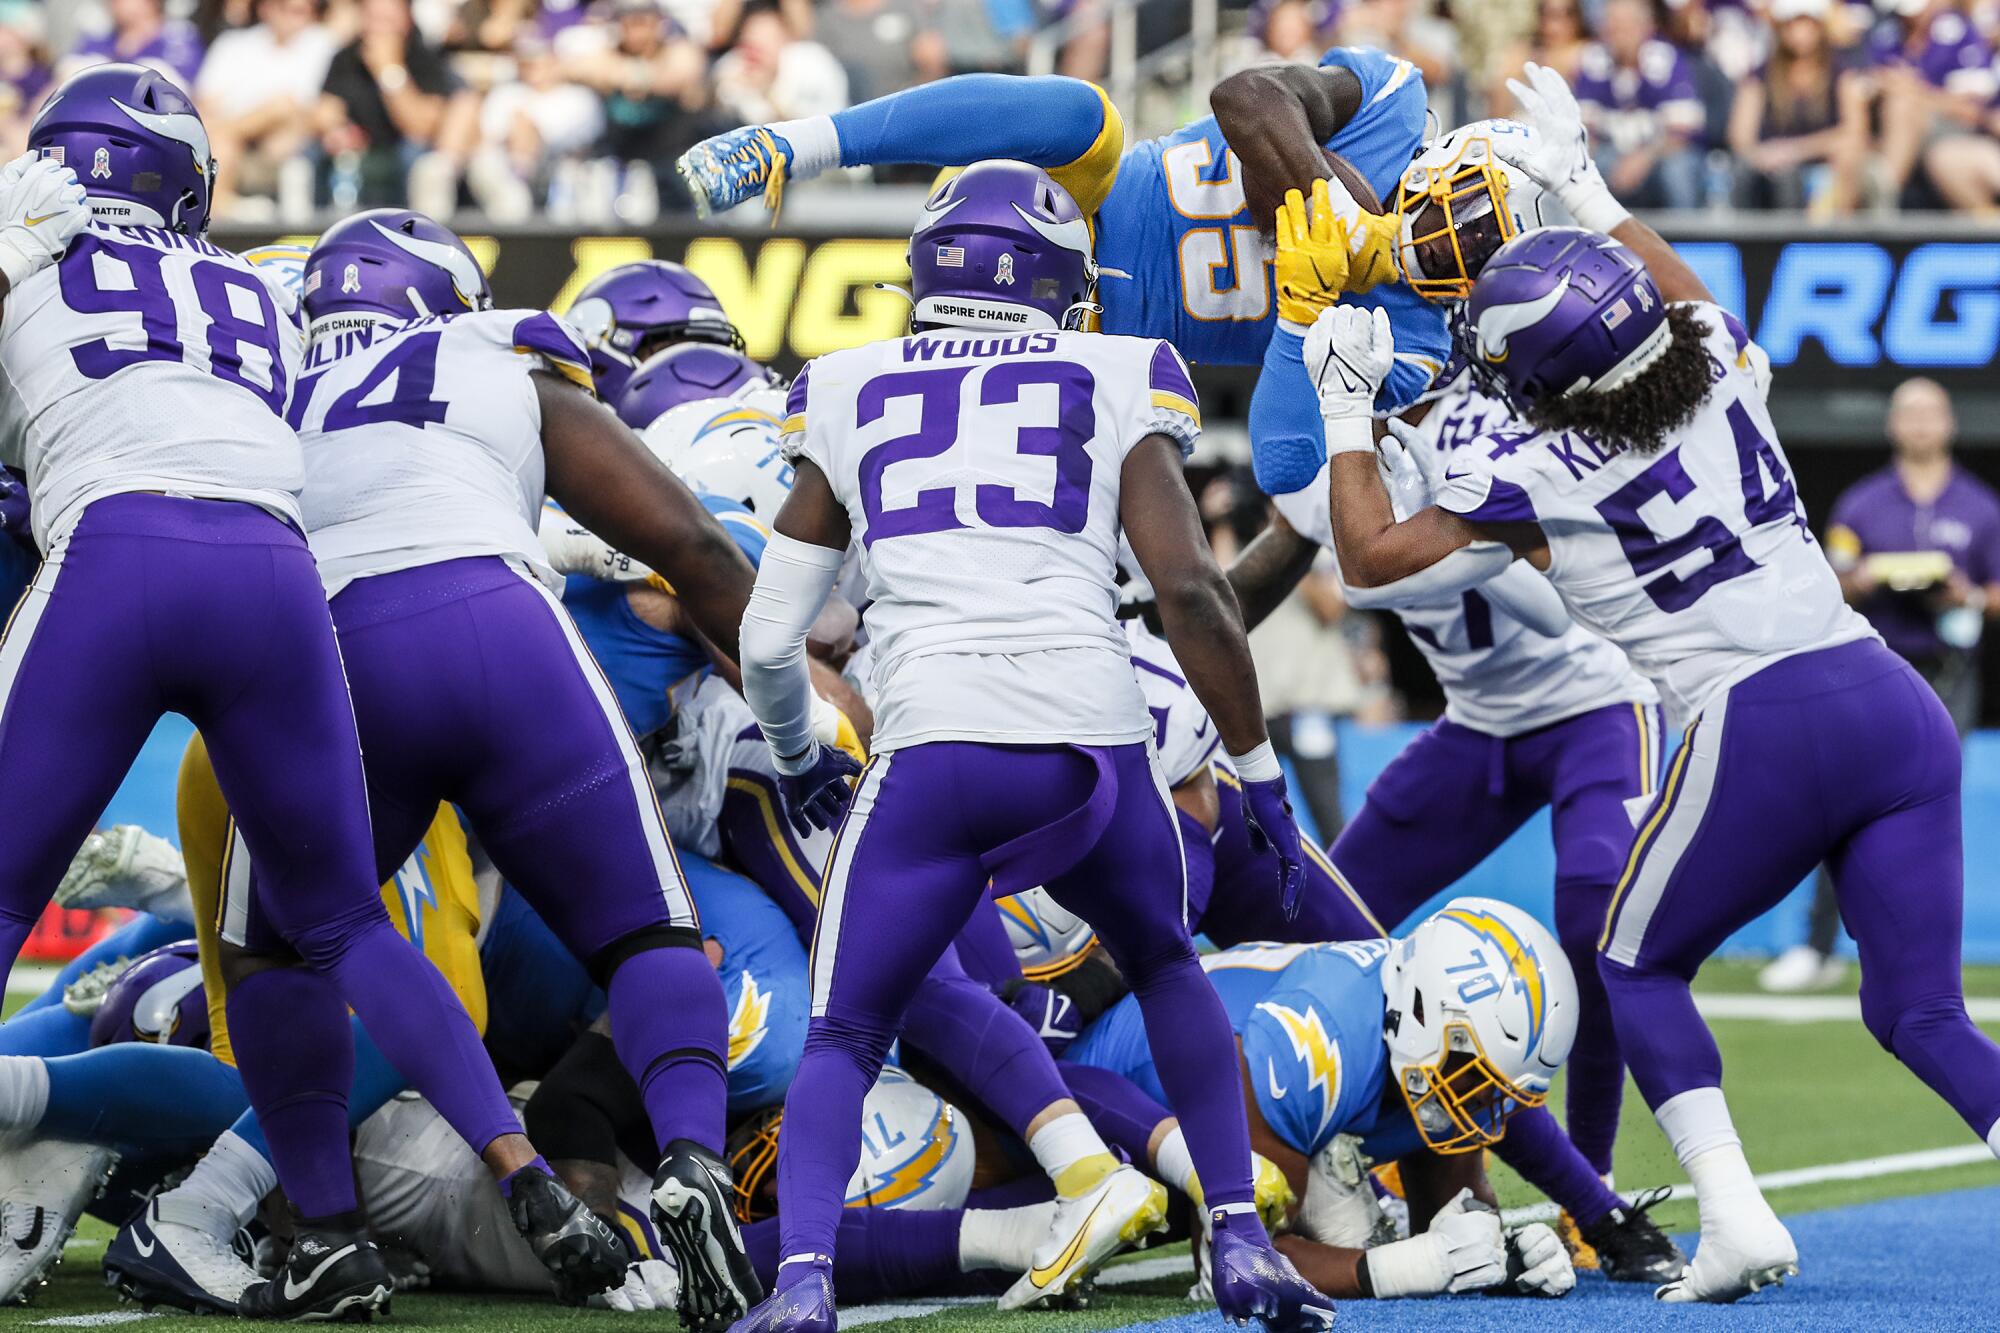 Chargers running back Larry Rountree III propels himself over the Minnesota Vikings defensive line.